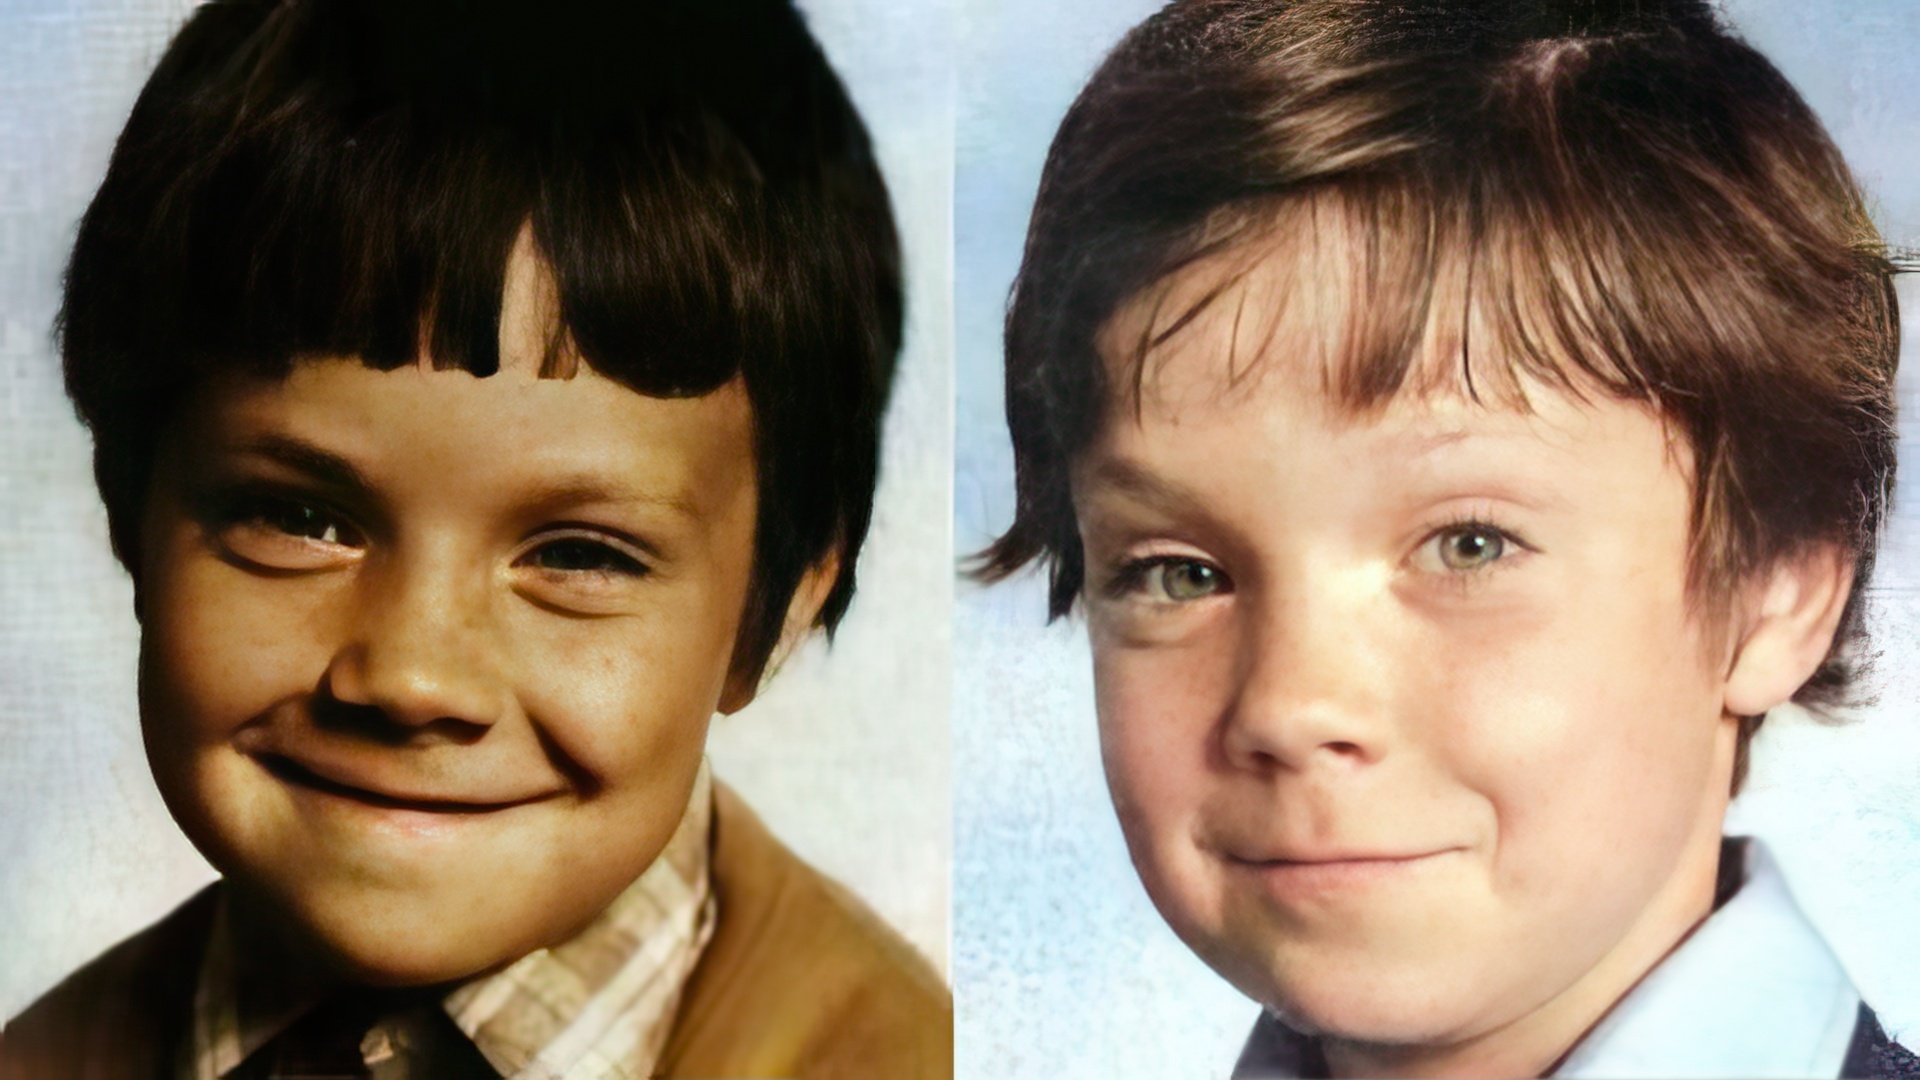 Robbie Williams as a child